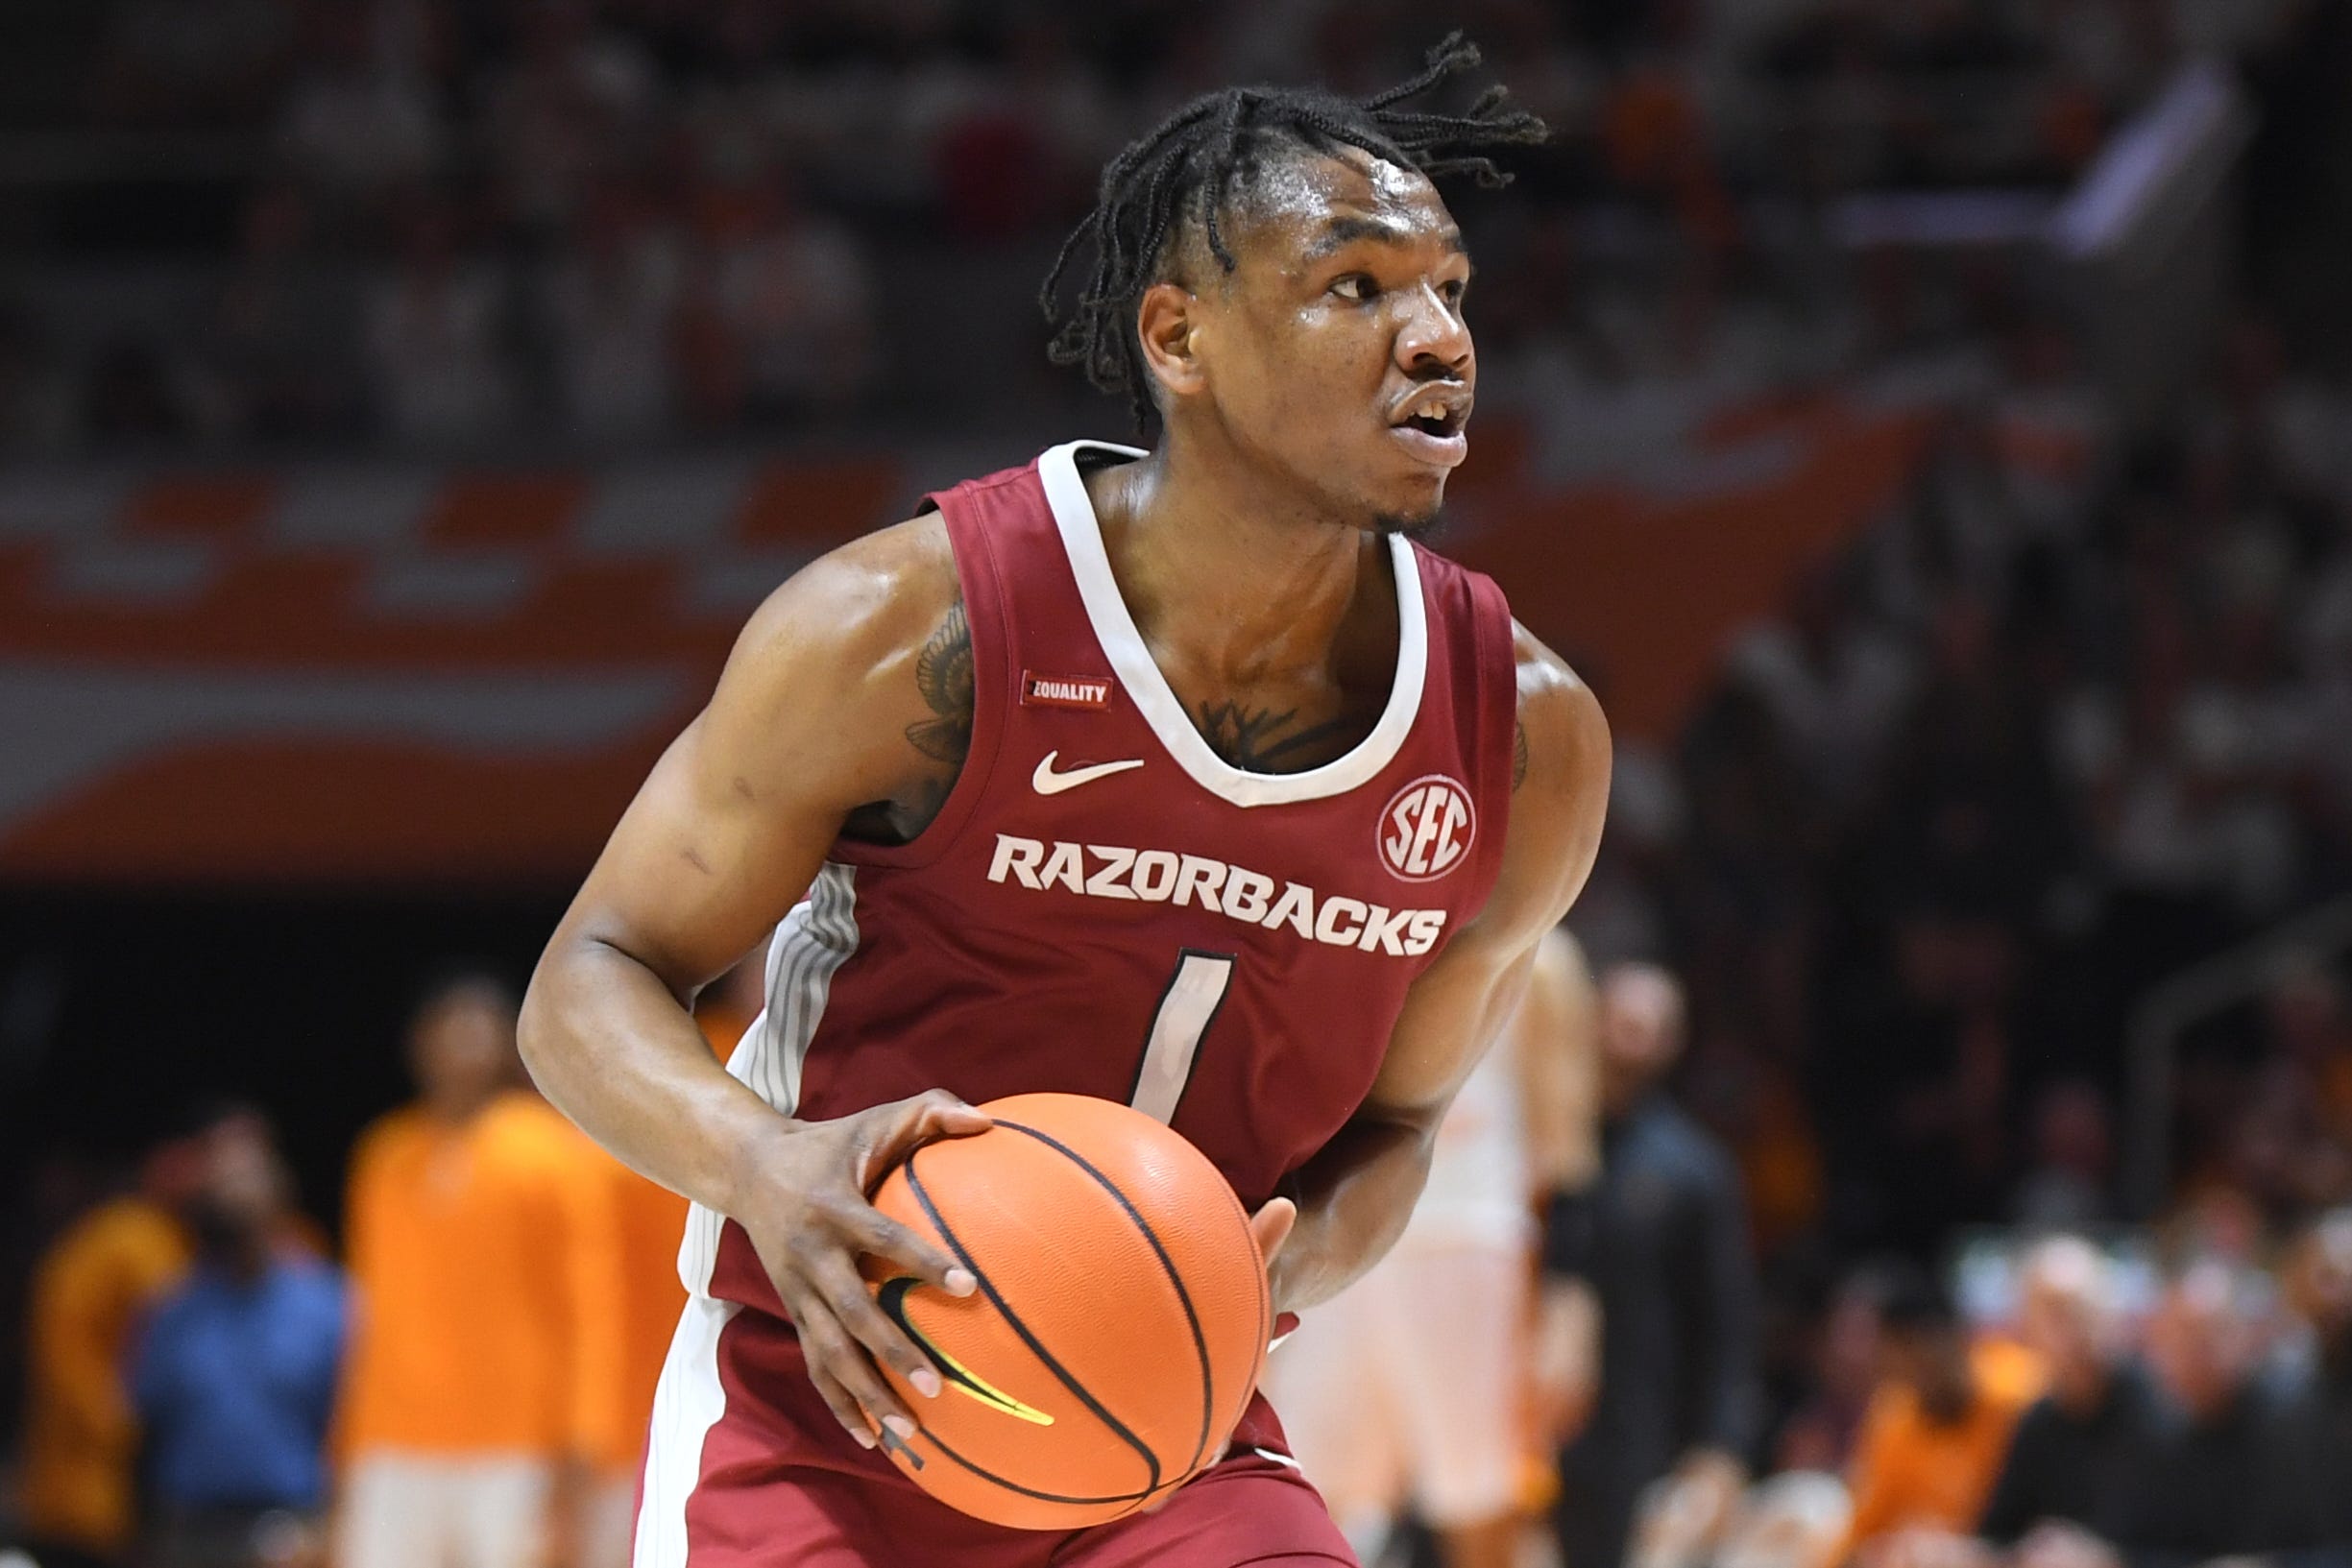 Arkansas guard JD Notae (1) dribbles the ball during the final regular season game between Tennessee and Arkansas at Thompson-Boling Arena in Knoxville, Tenn., Saturday, March 5, 2022